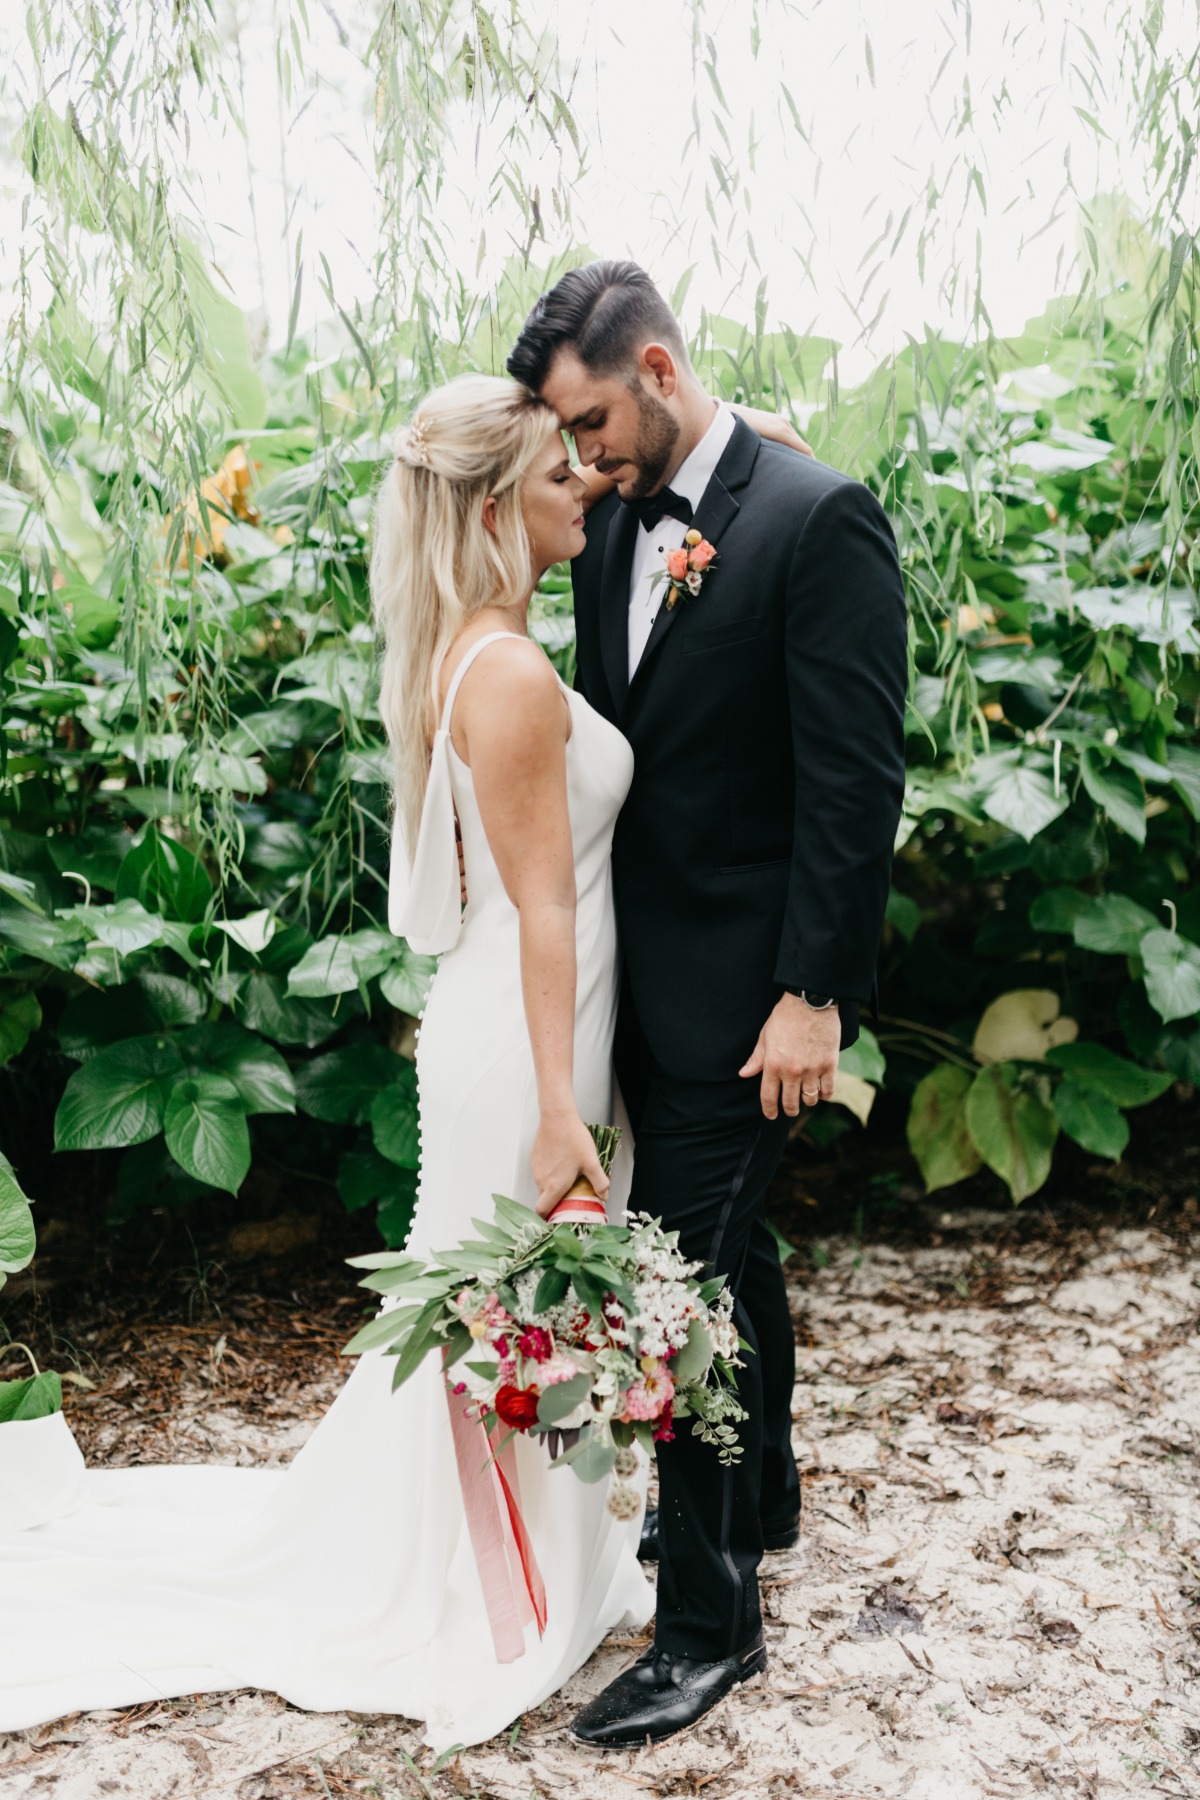 How To Have A Modern Day Nature Inspired Wedding